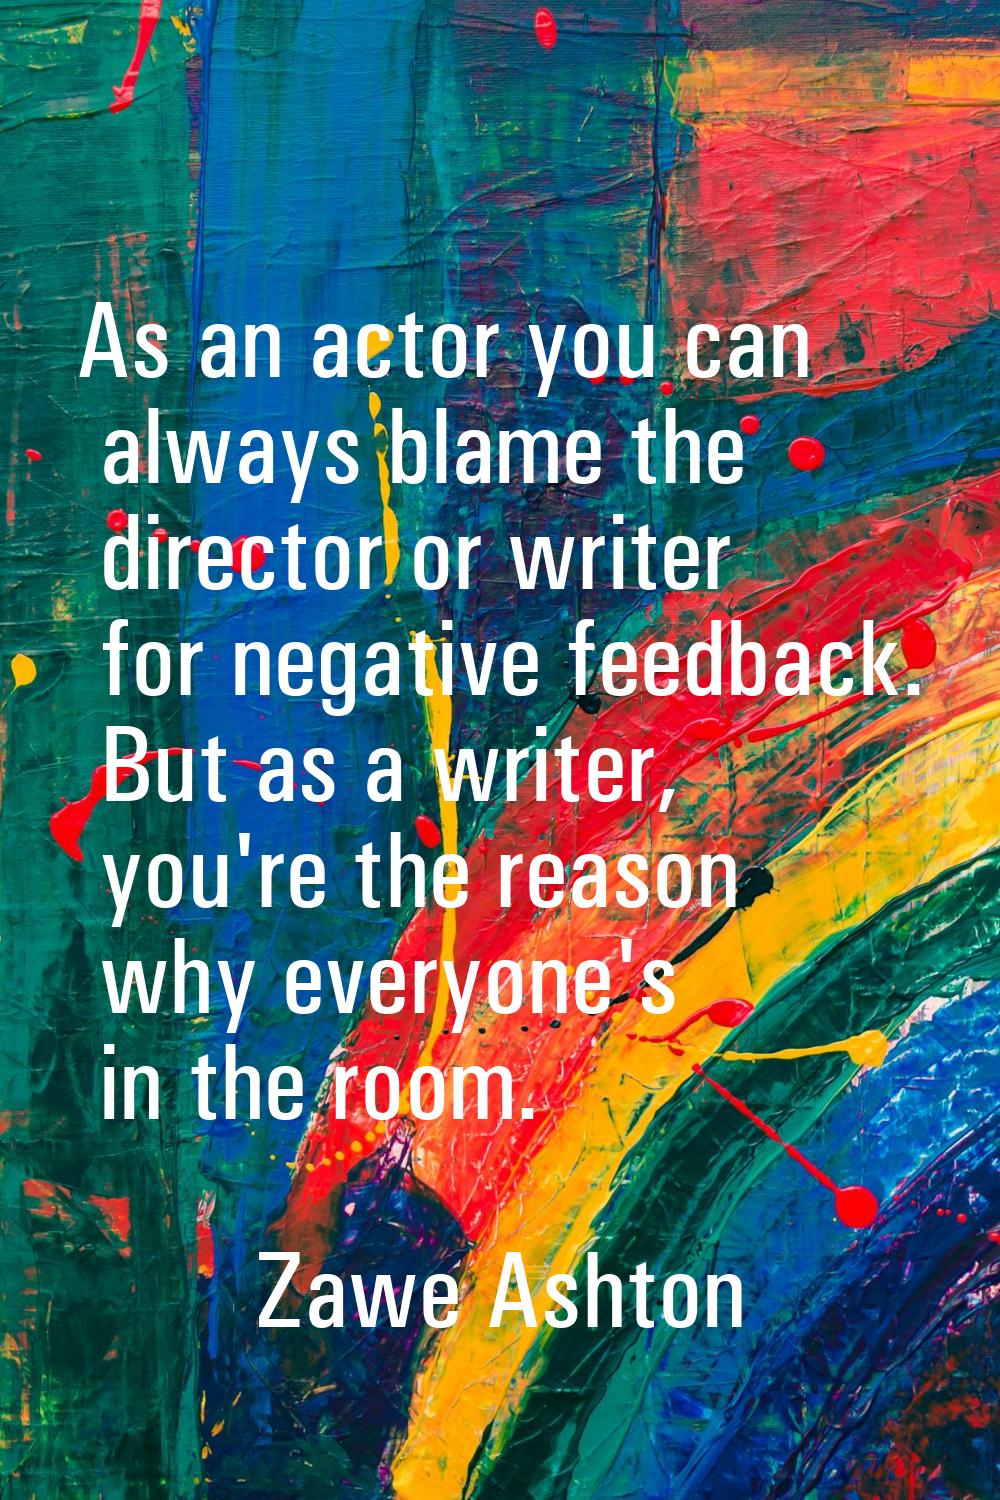 As an actor you can always blame the director or writer for negative feedback. But as a writer, you